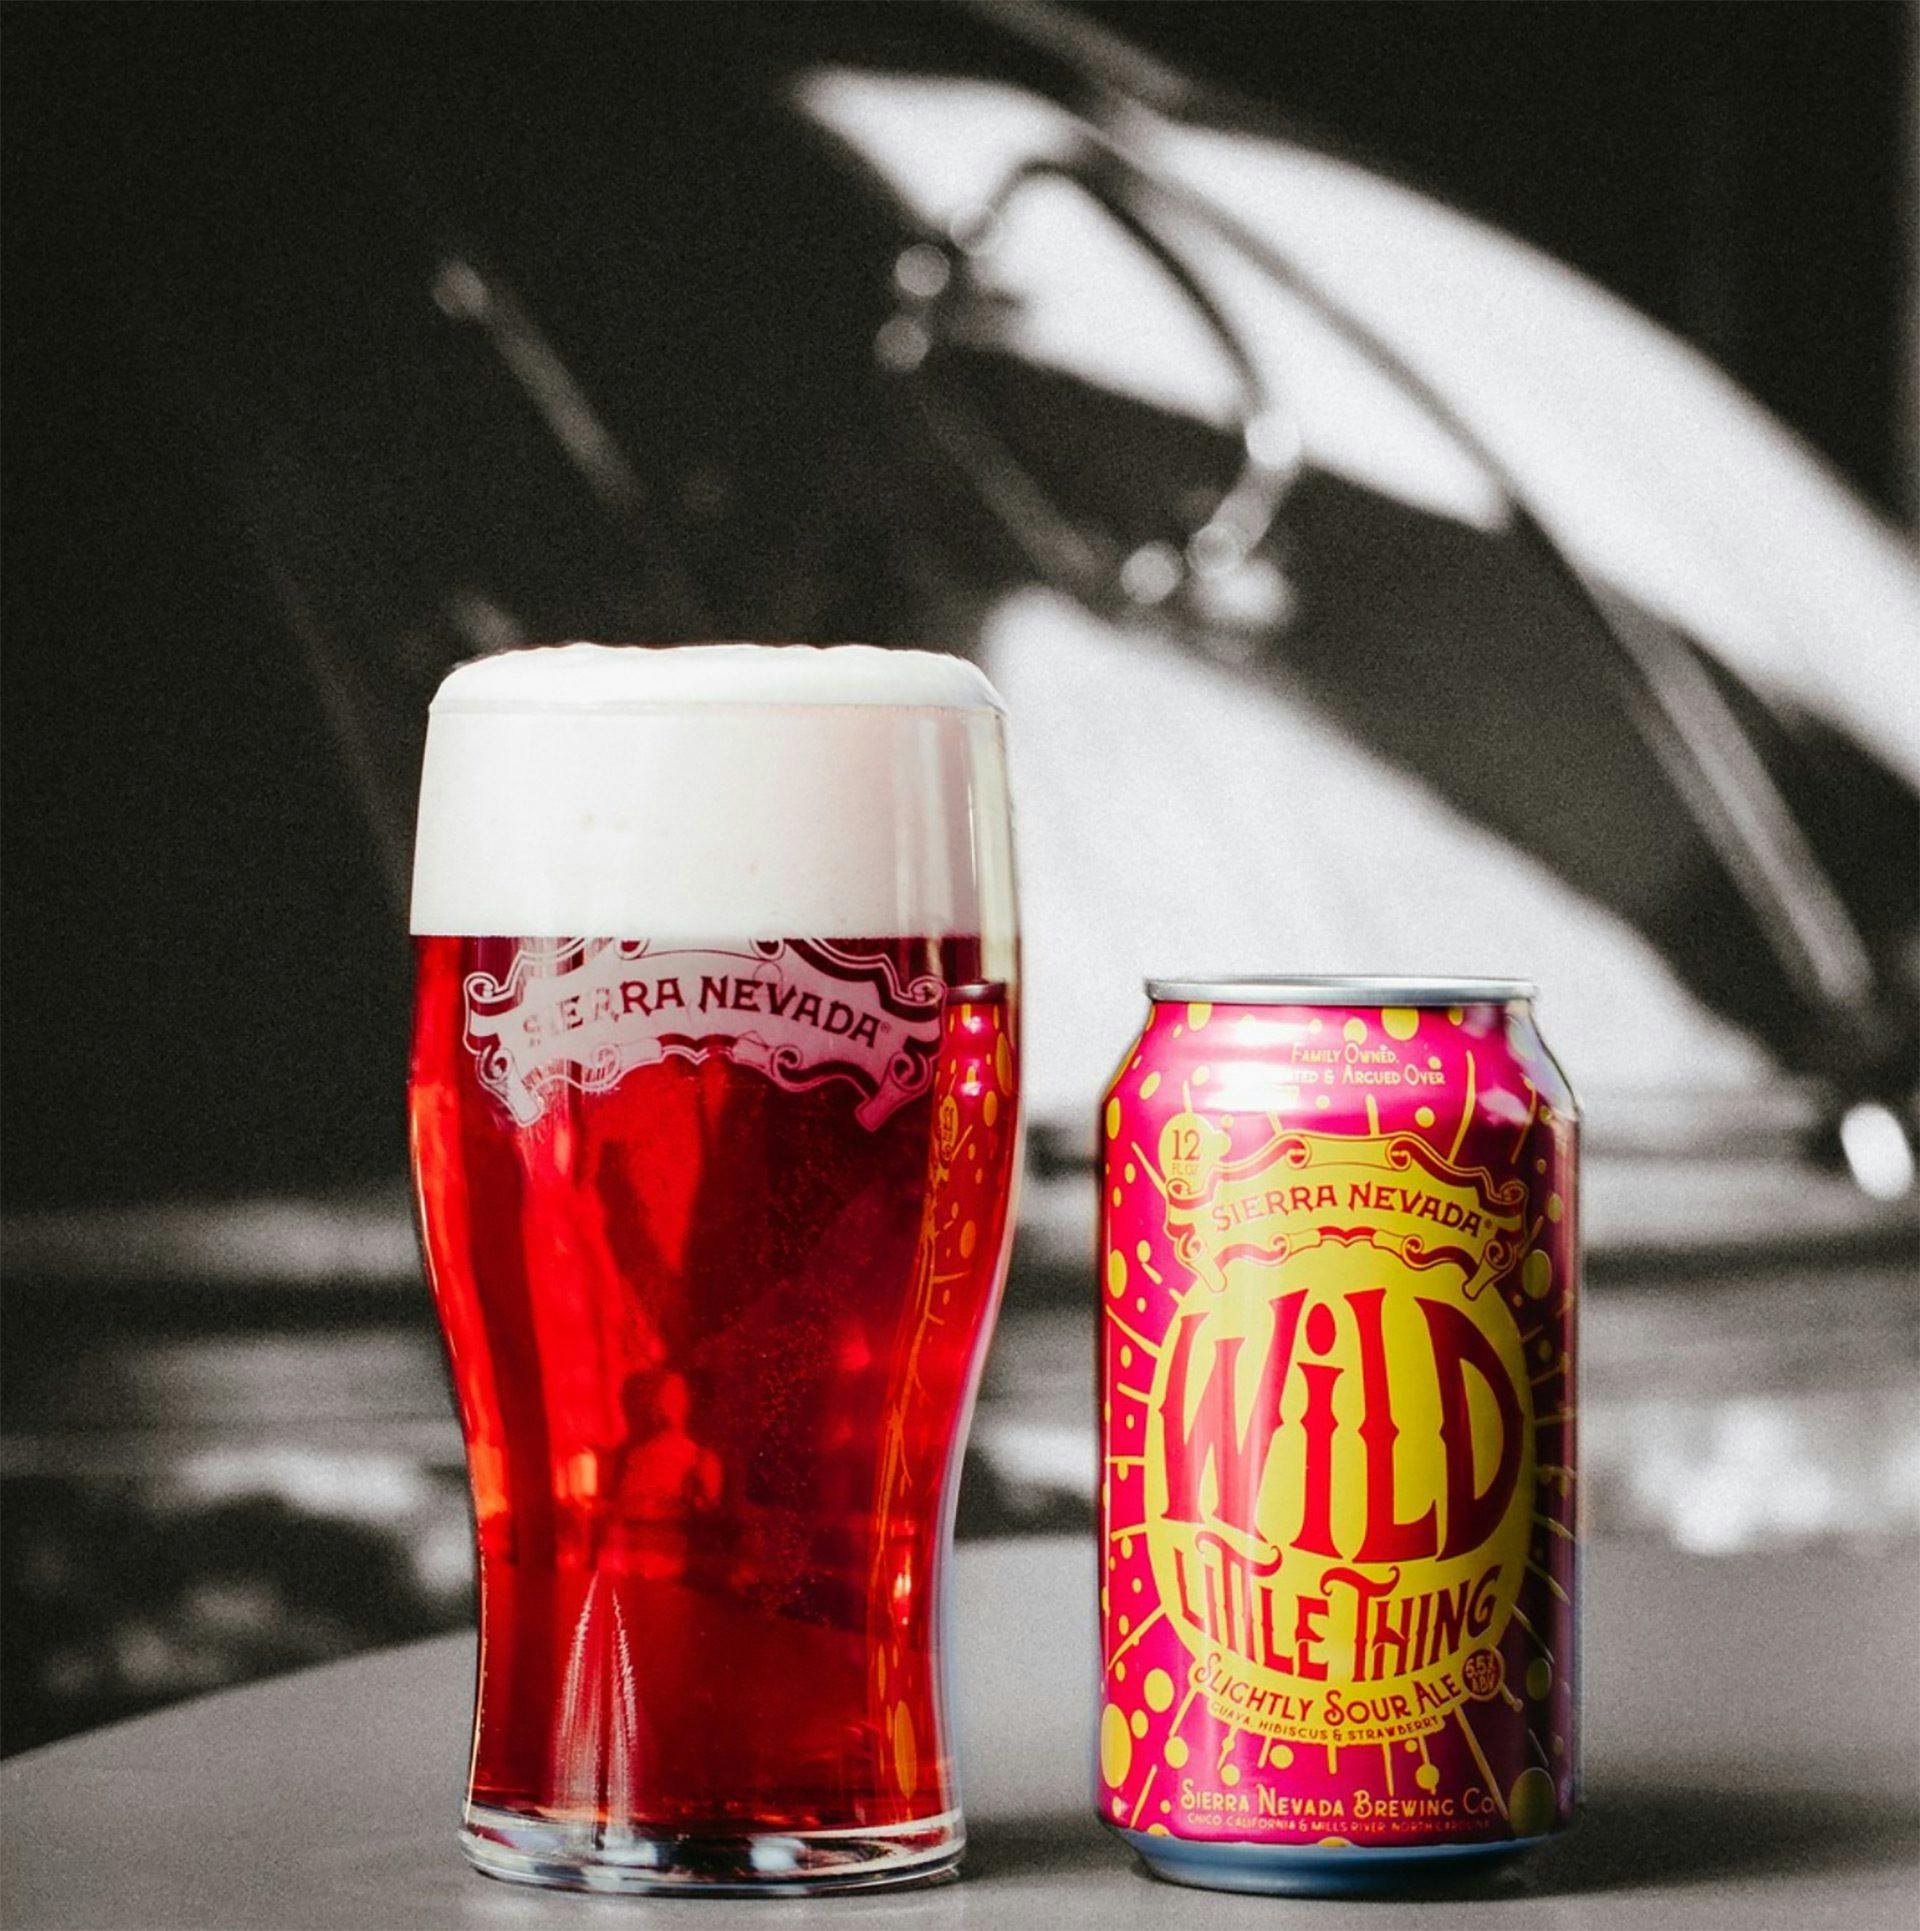 Wild Little Thing - Guava, Hibiscus, Strawberry Sour Ale